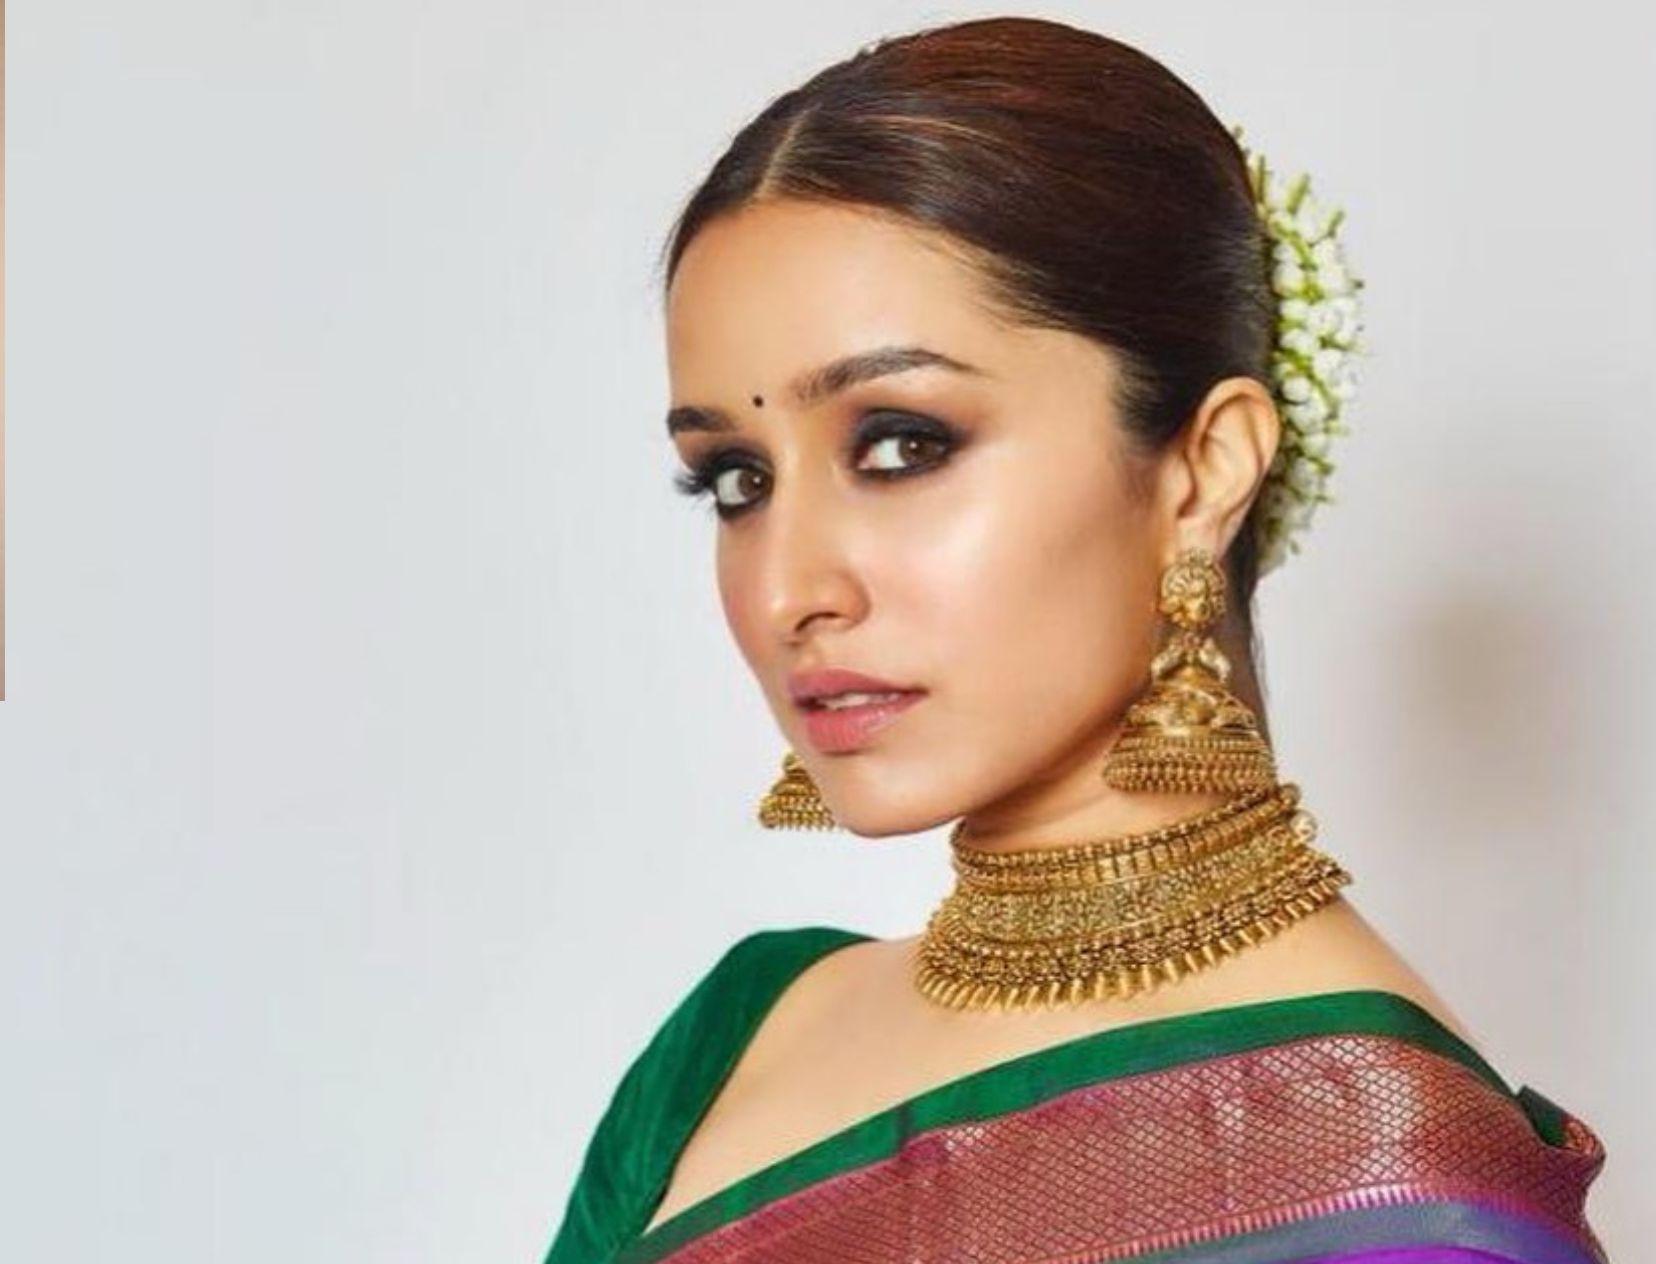 Wait, What! Shraddha Kapoor Uses Butter To Remove Her Makeup?